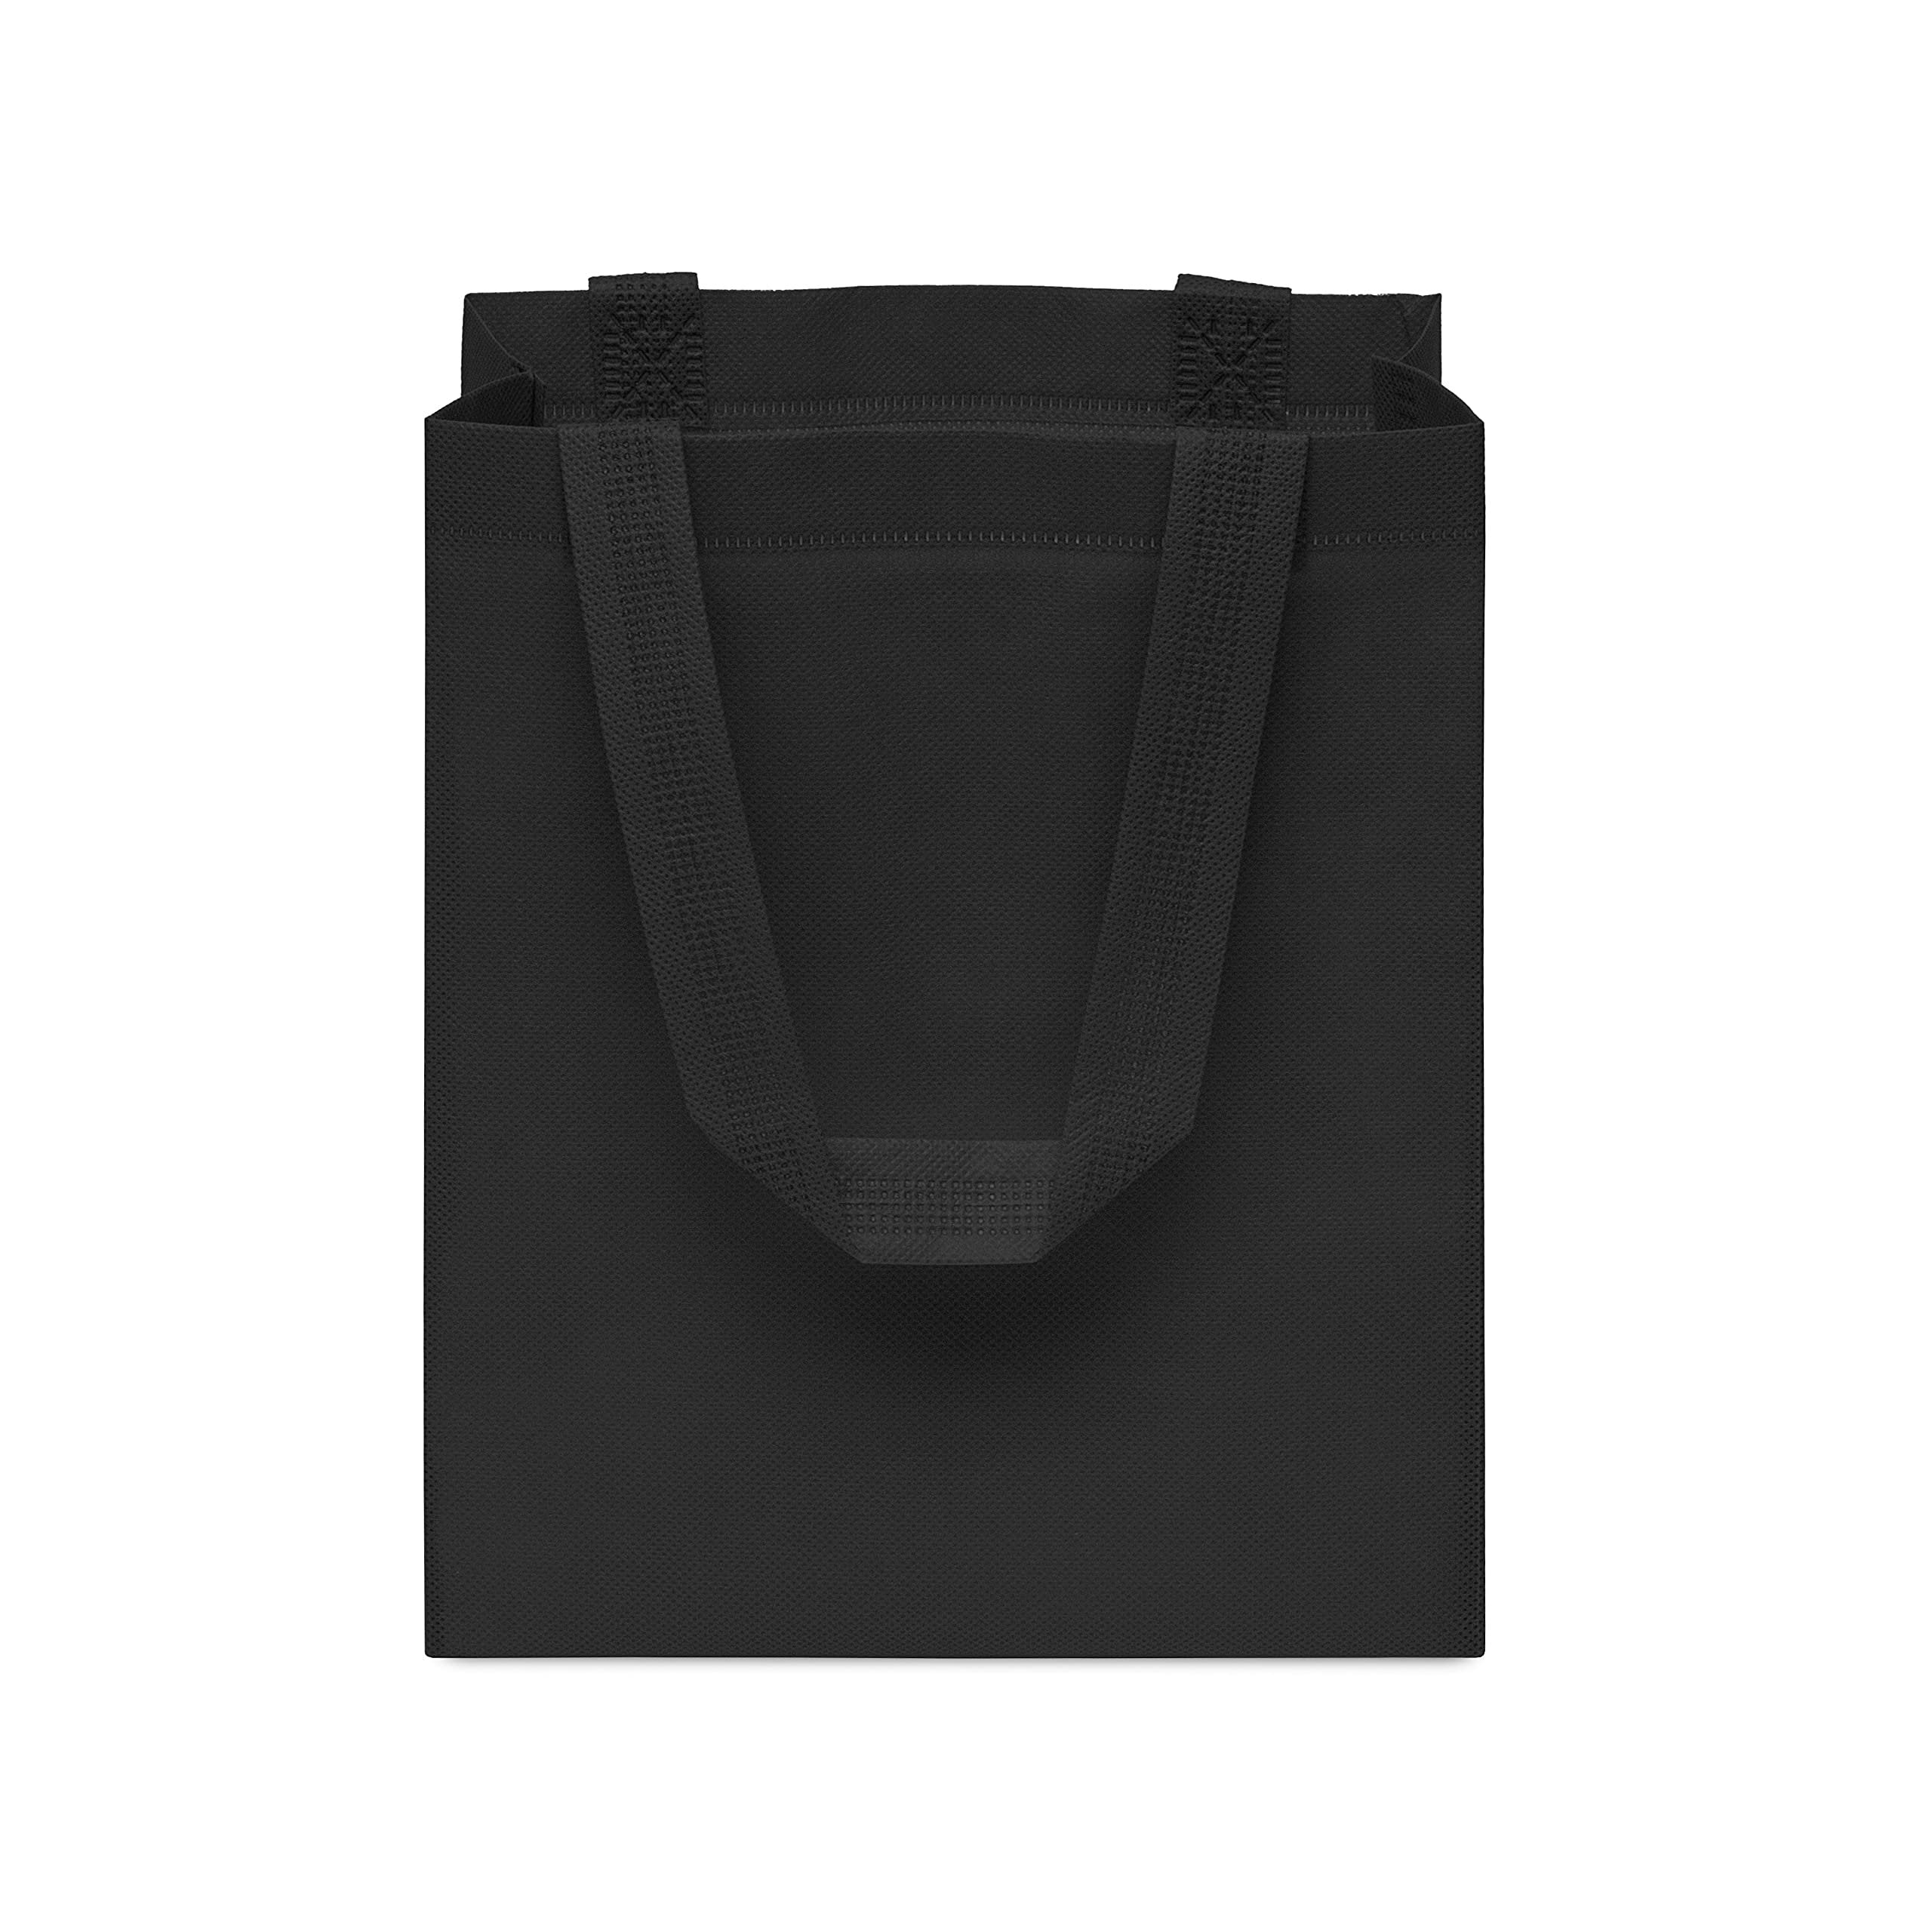 ZENPAC 8x4x10 Black Eco-Friendly Reusable Gift Bags - 12 Pack with Handles for Shopping, Events, Parties and More